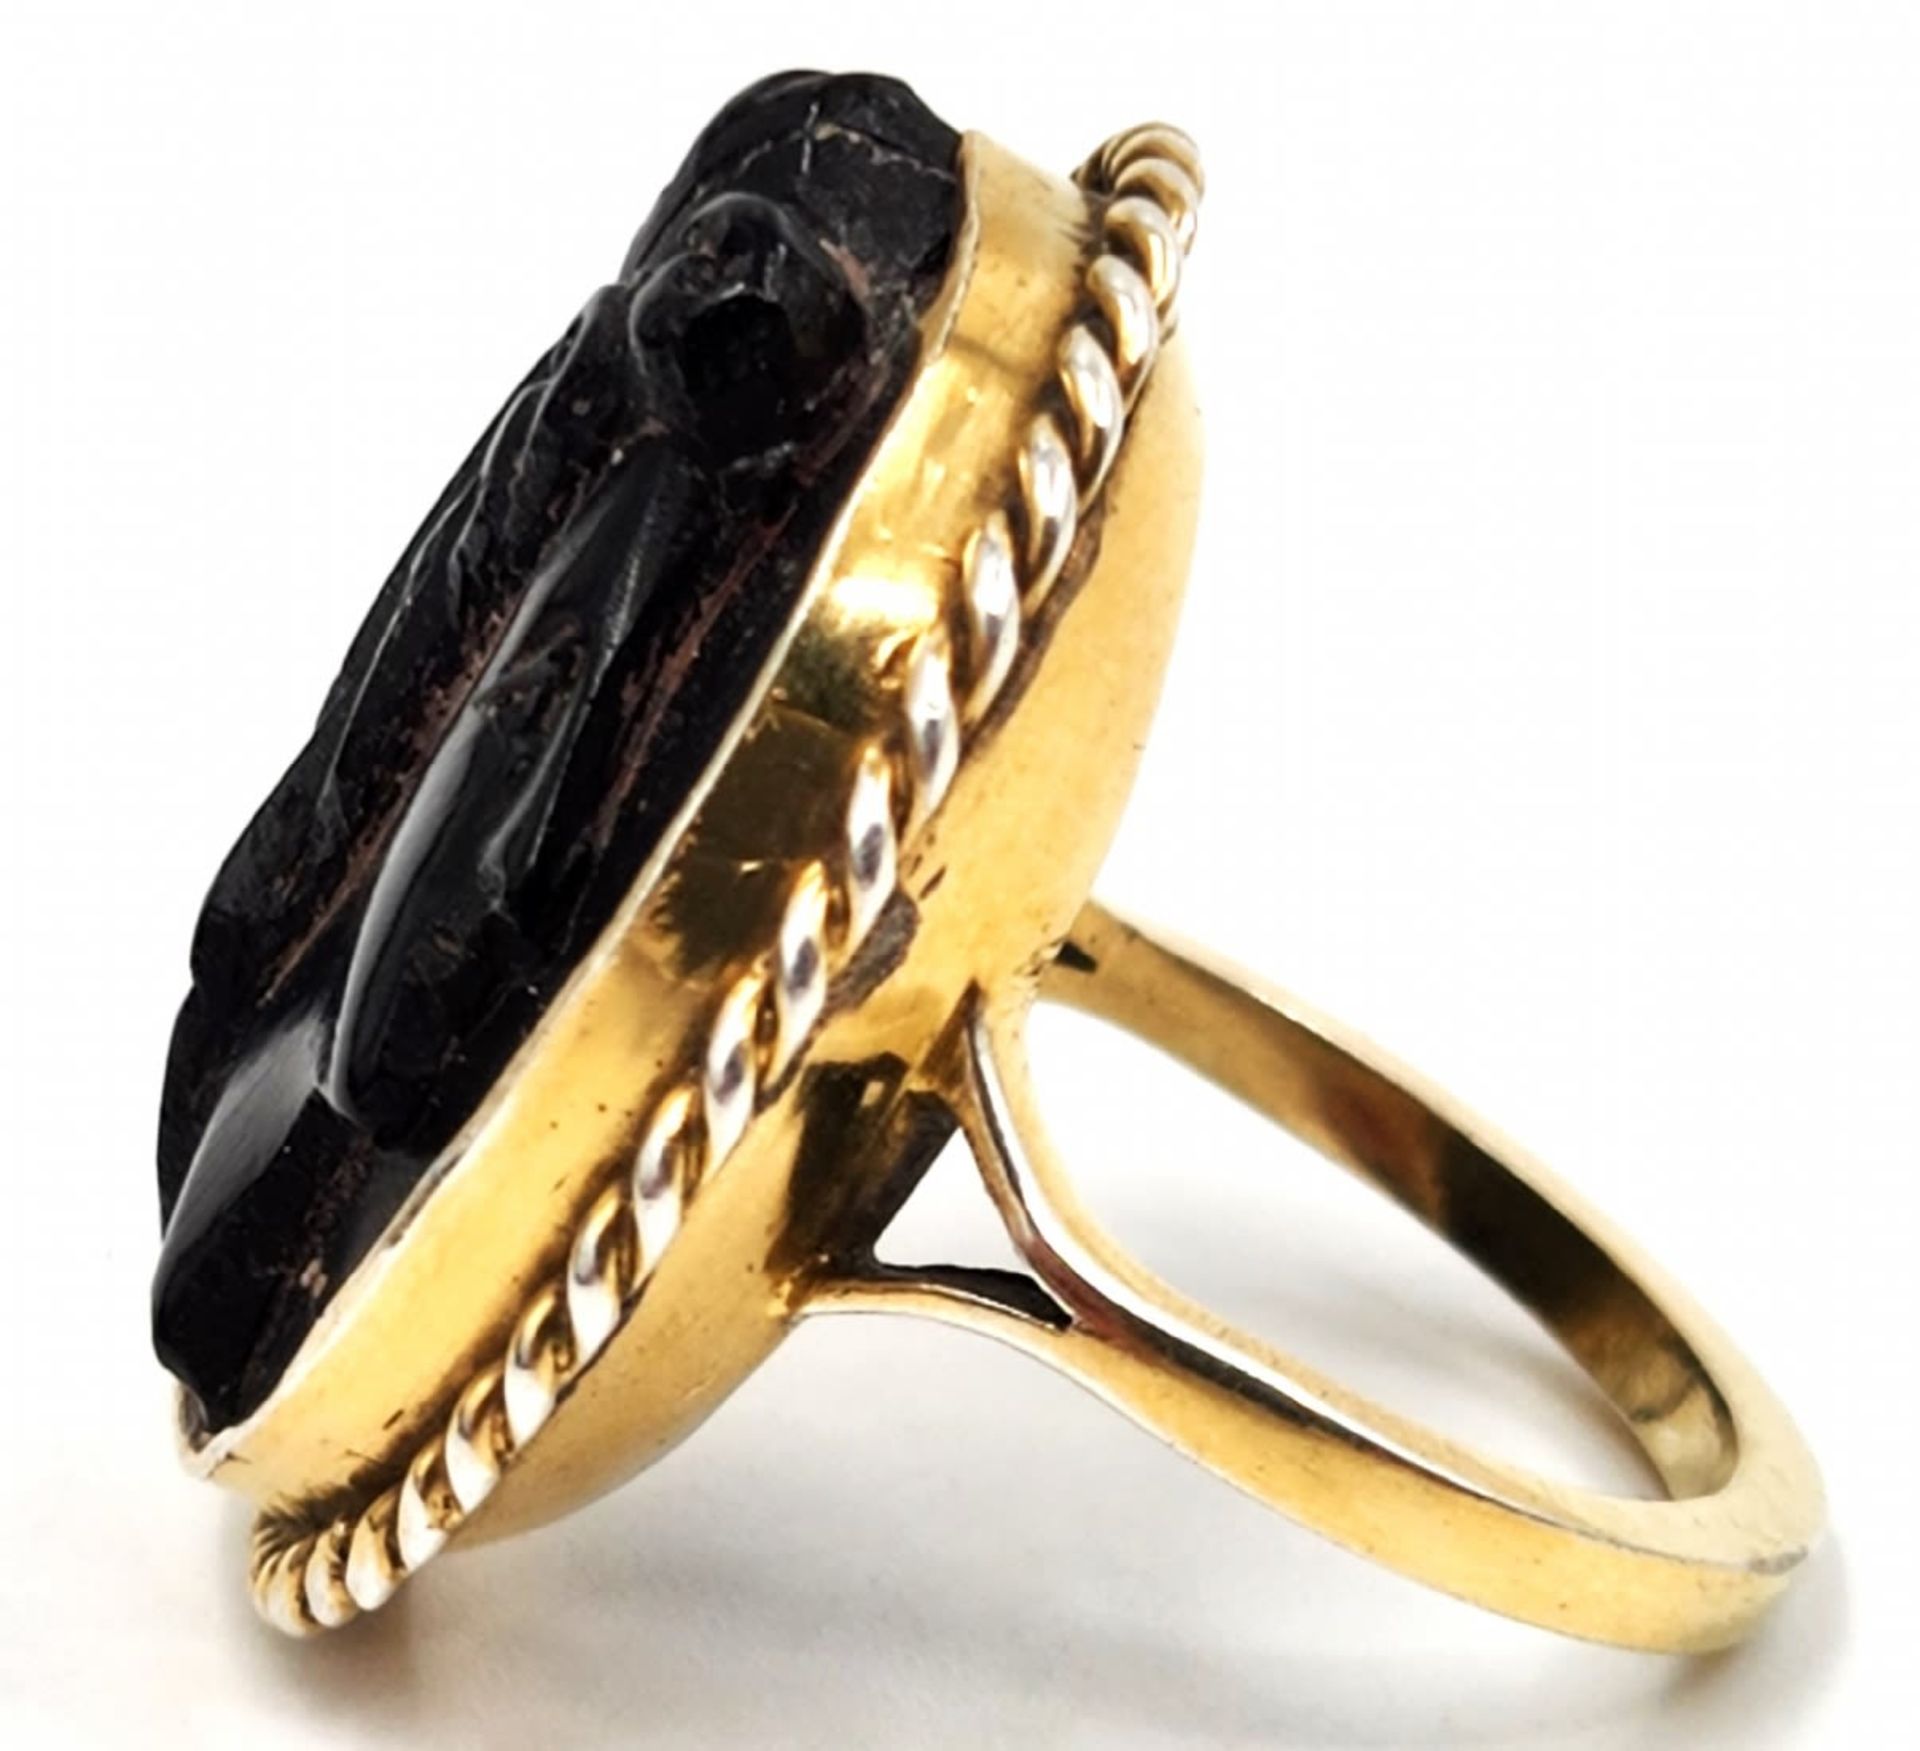 Antique 19th century English cameo 9K gold ring inlaid with a Whitby Jet plate, unsigned, the purity - Image 2 of 4